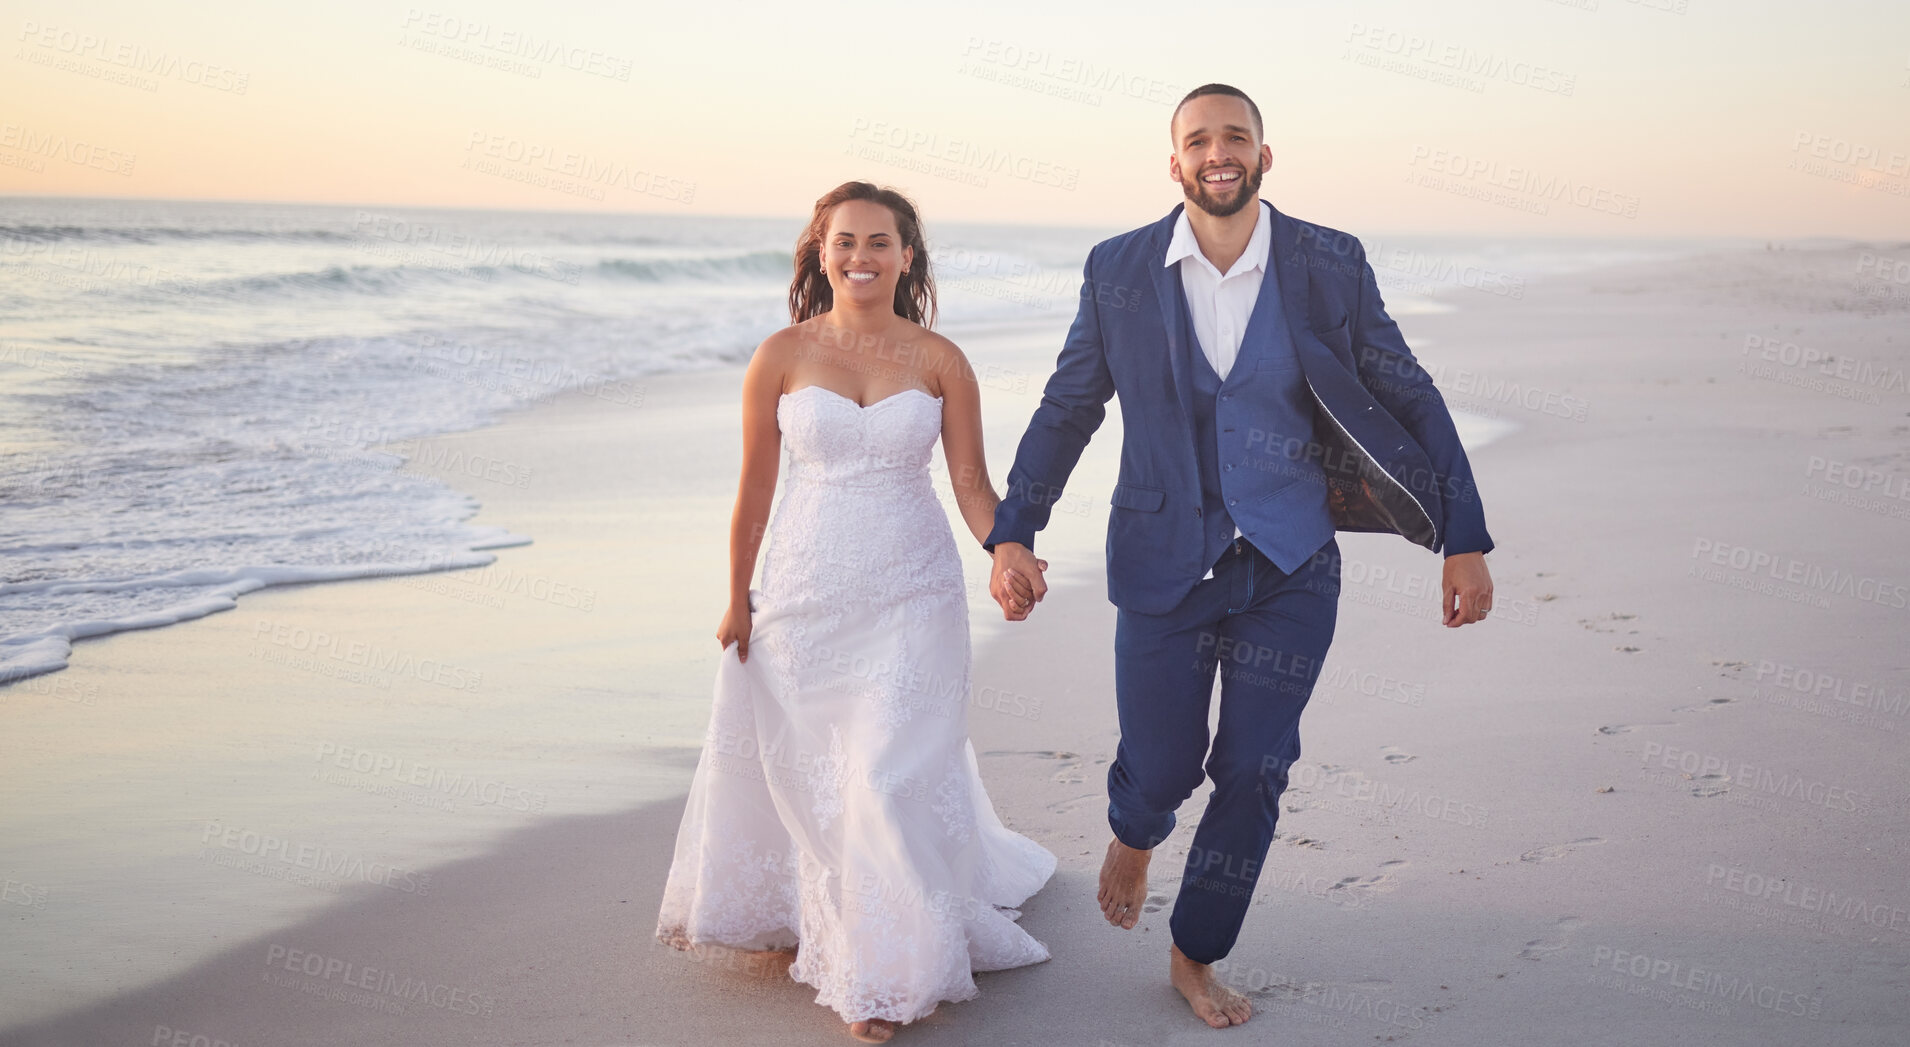 Buy stock photo Wedding, couple and beach with a man and woman holding hands while walking on the sand by the ocean or sea. Love, trust and marriage with a bride and groom on the coast at sunset for celebration